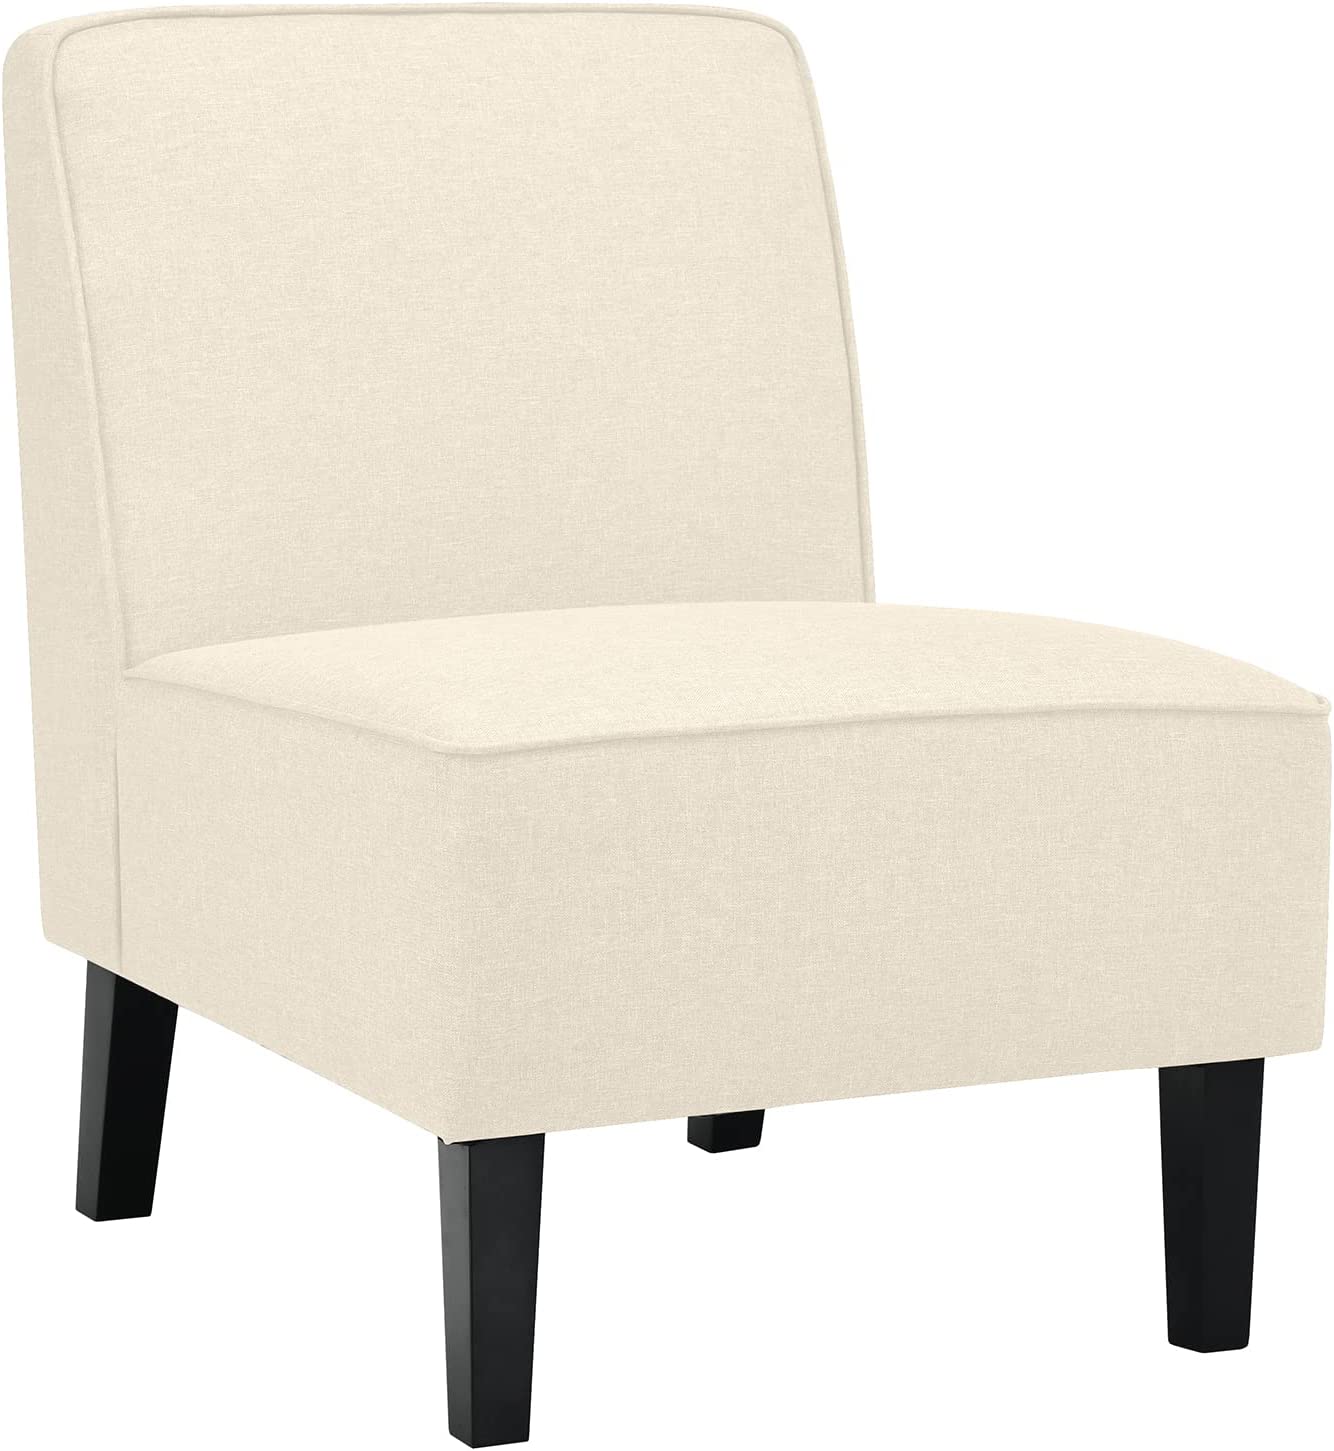 Giantex Upholstered Accent Chair Set of 2, Fabric Single Sofa Armless Accent Chair, Beige